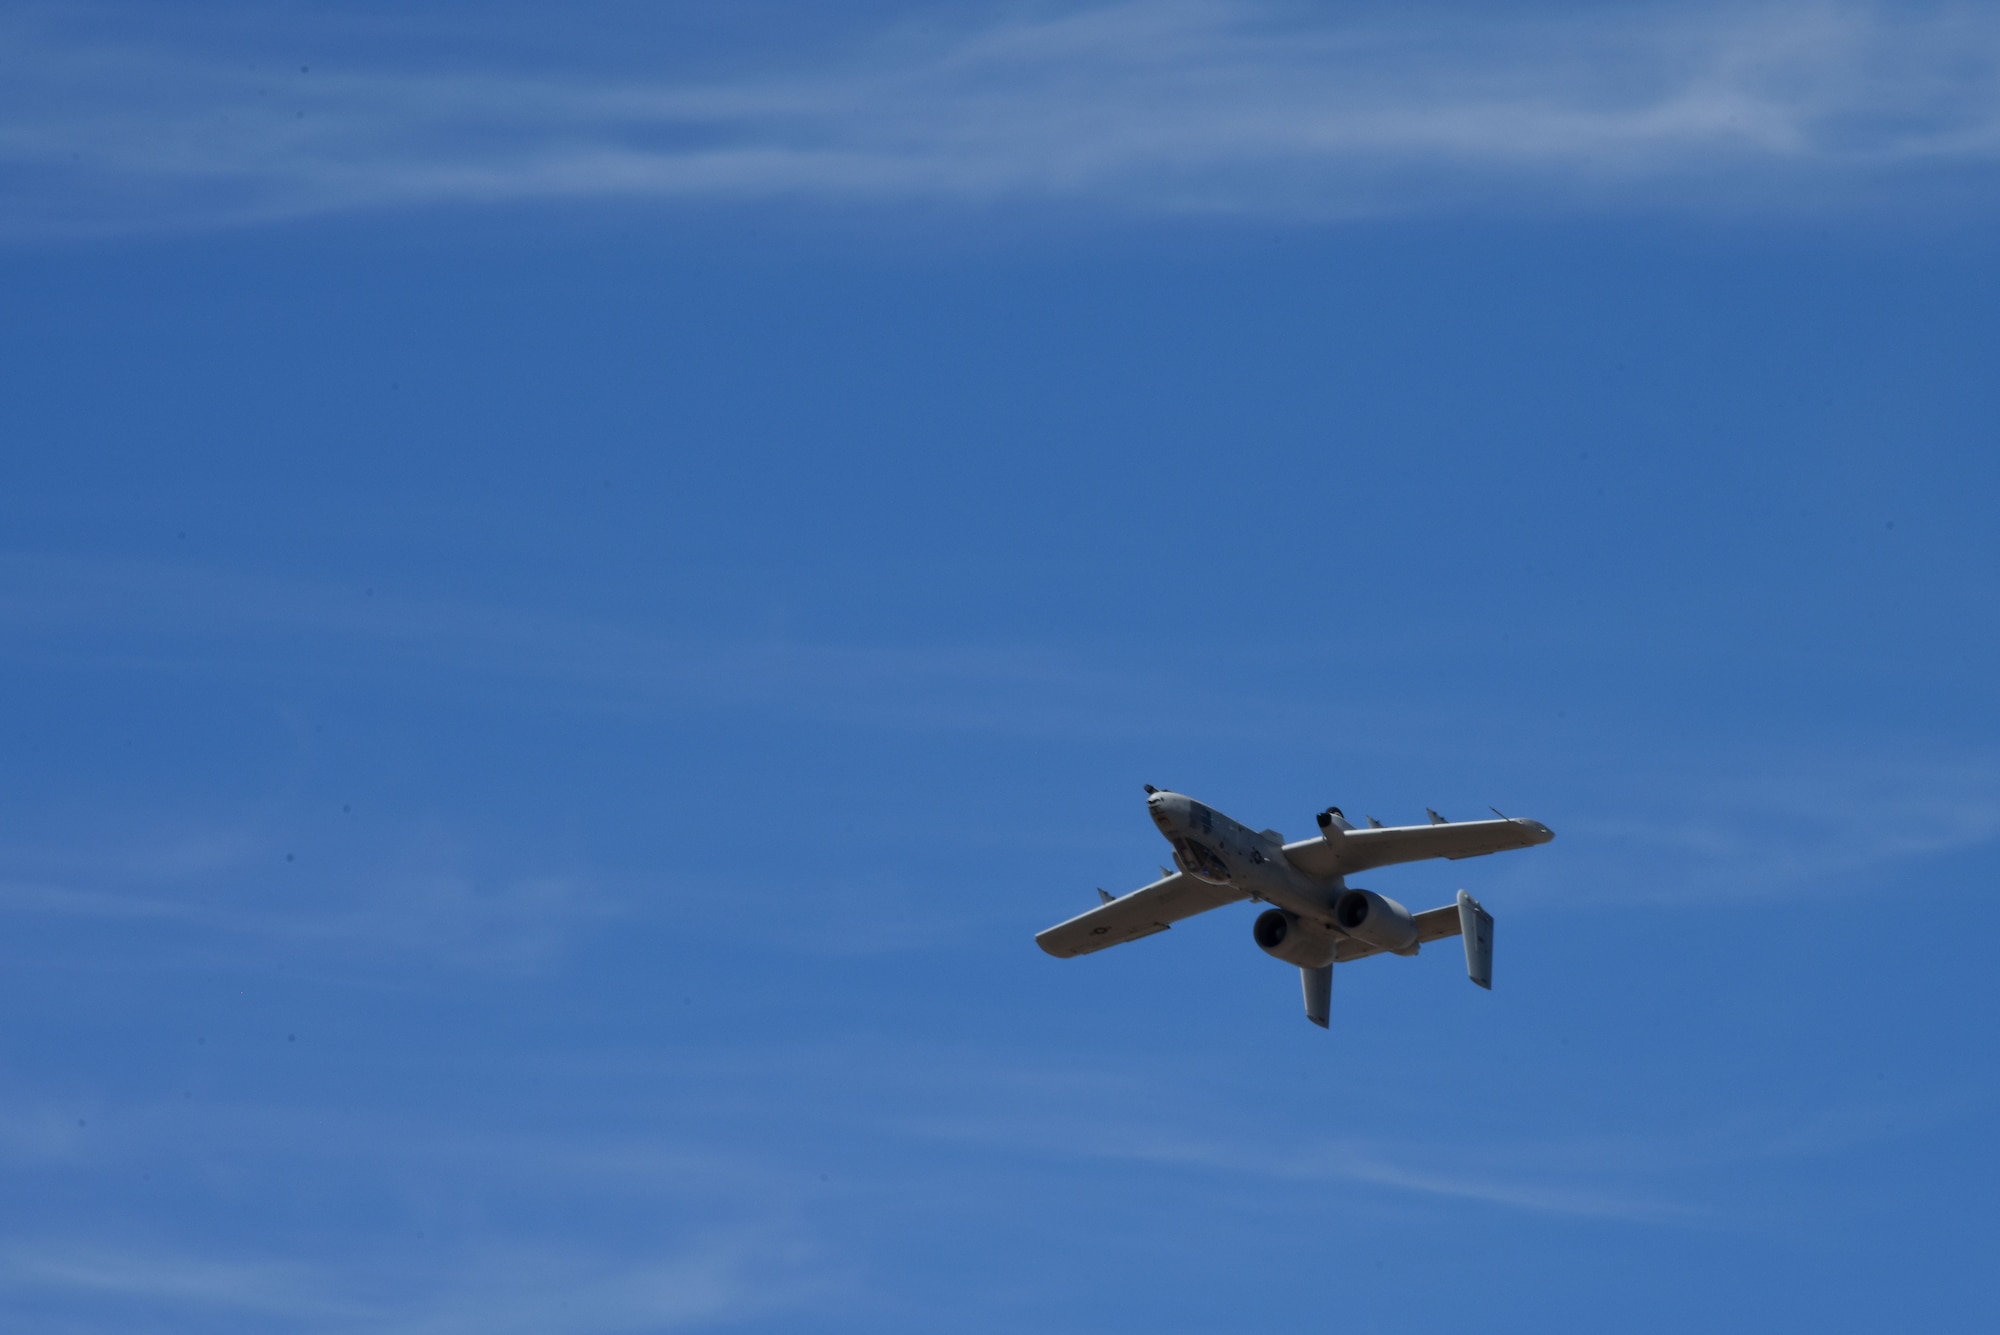 A photo of a plane flying over DM